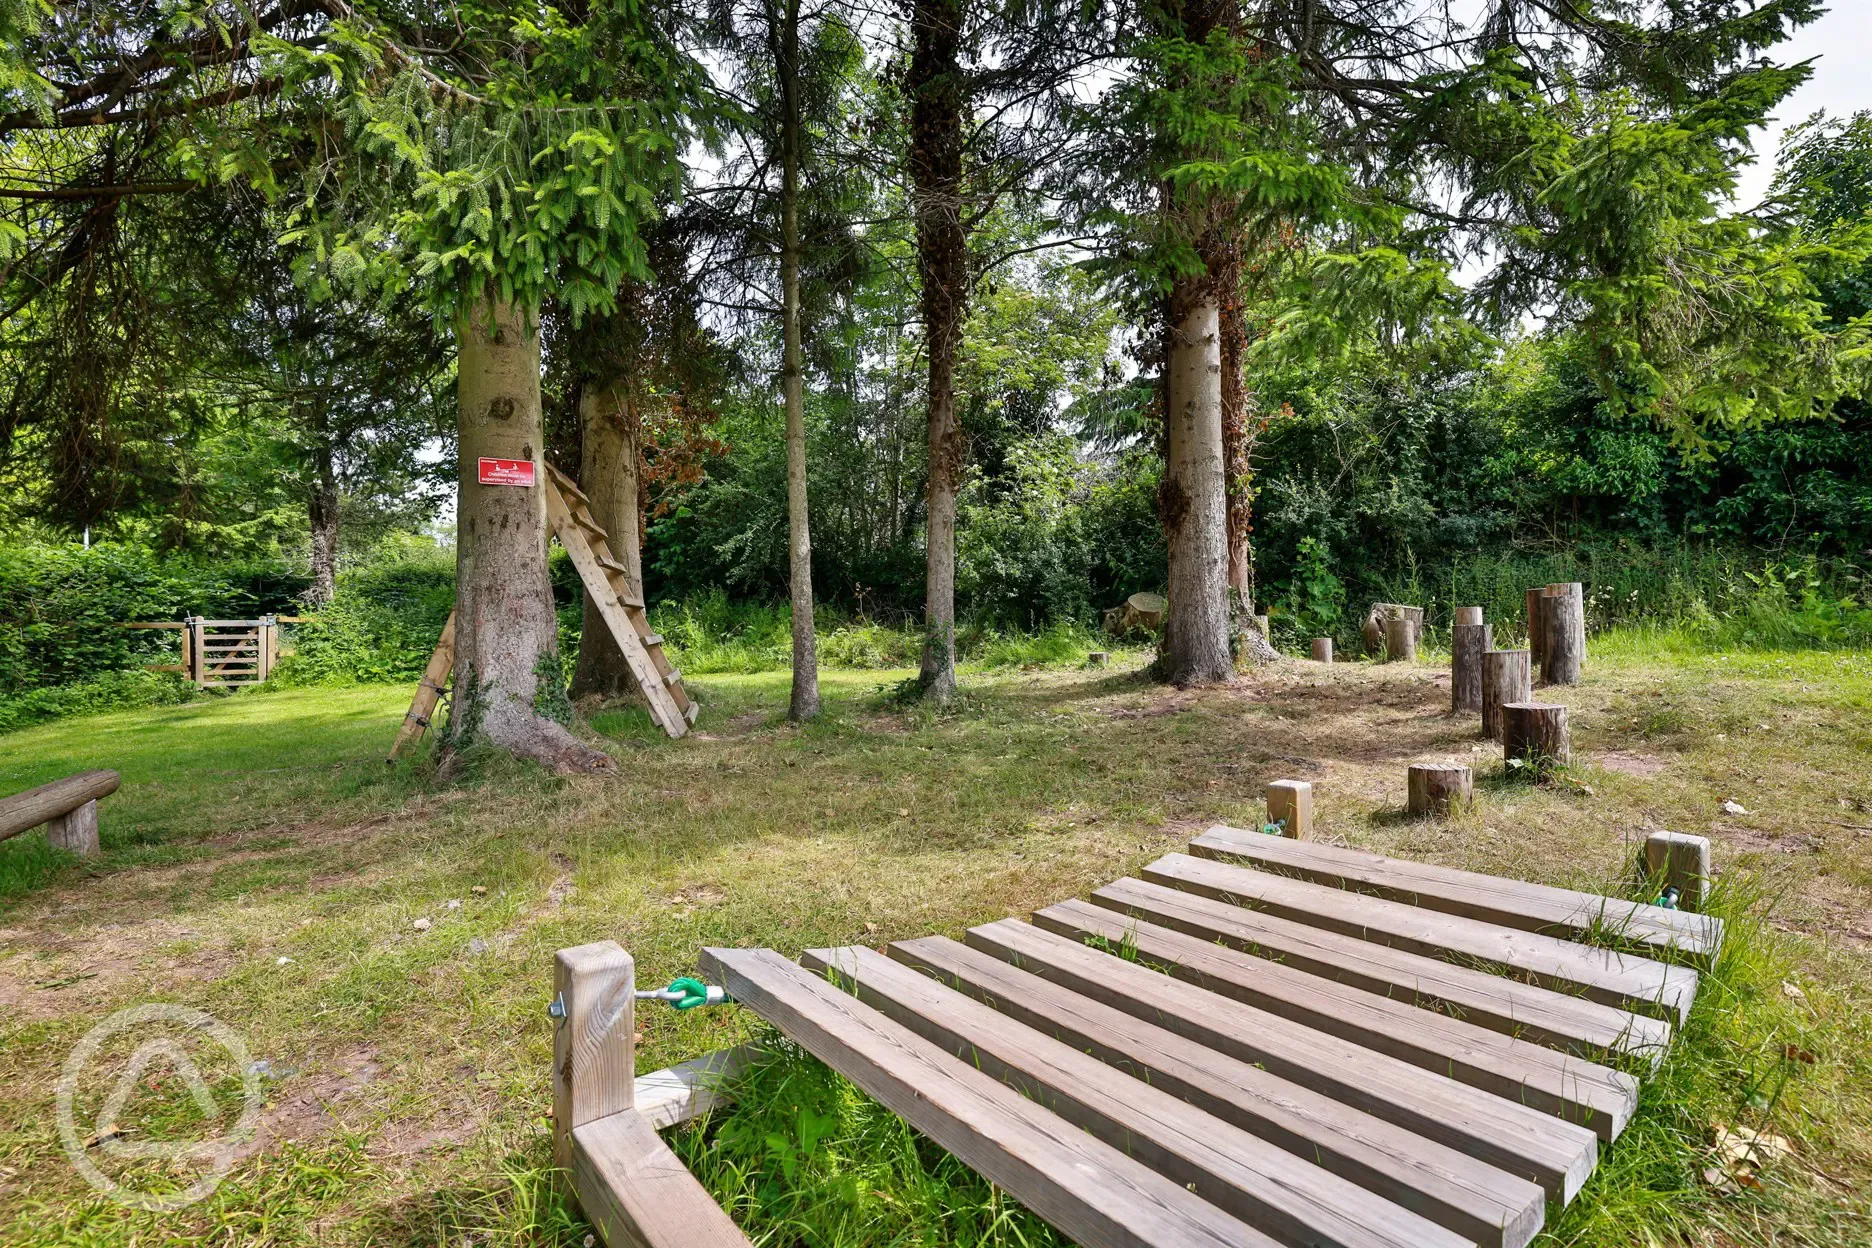 Children's play area- the timber trail